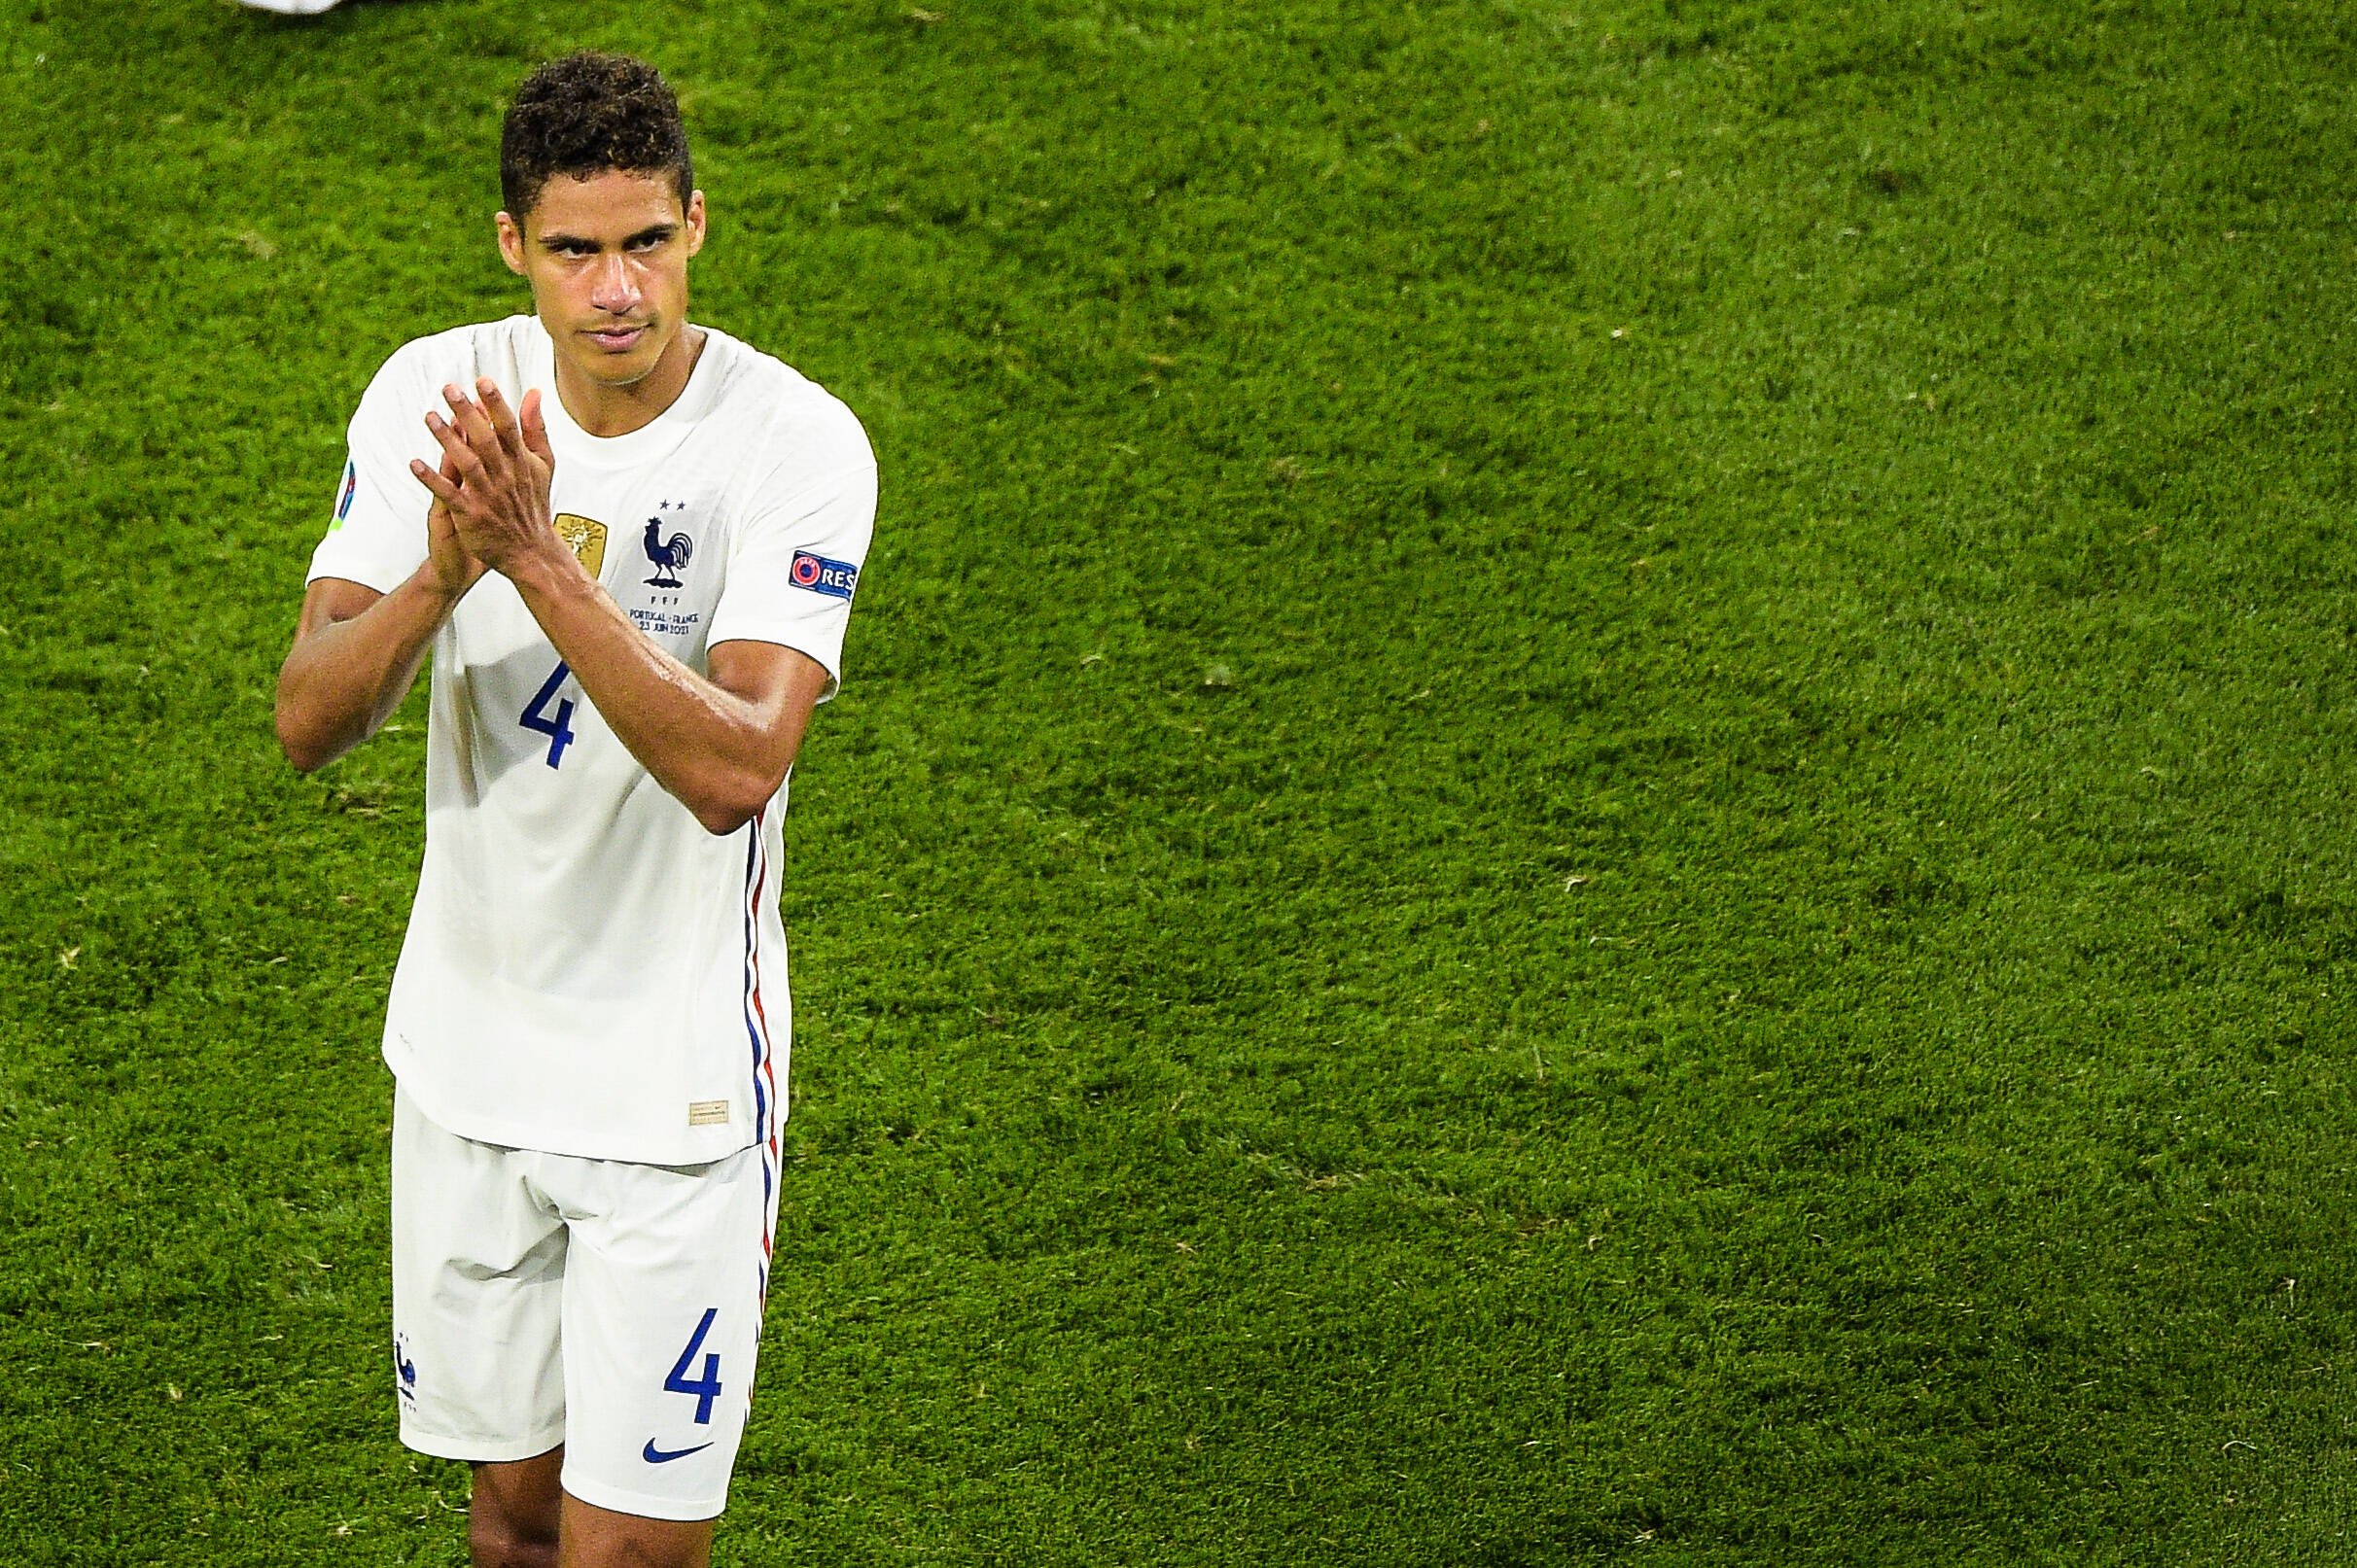 Chelsea join the race to land Varane who is seen in the photo